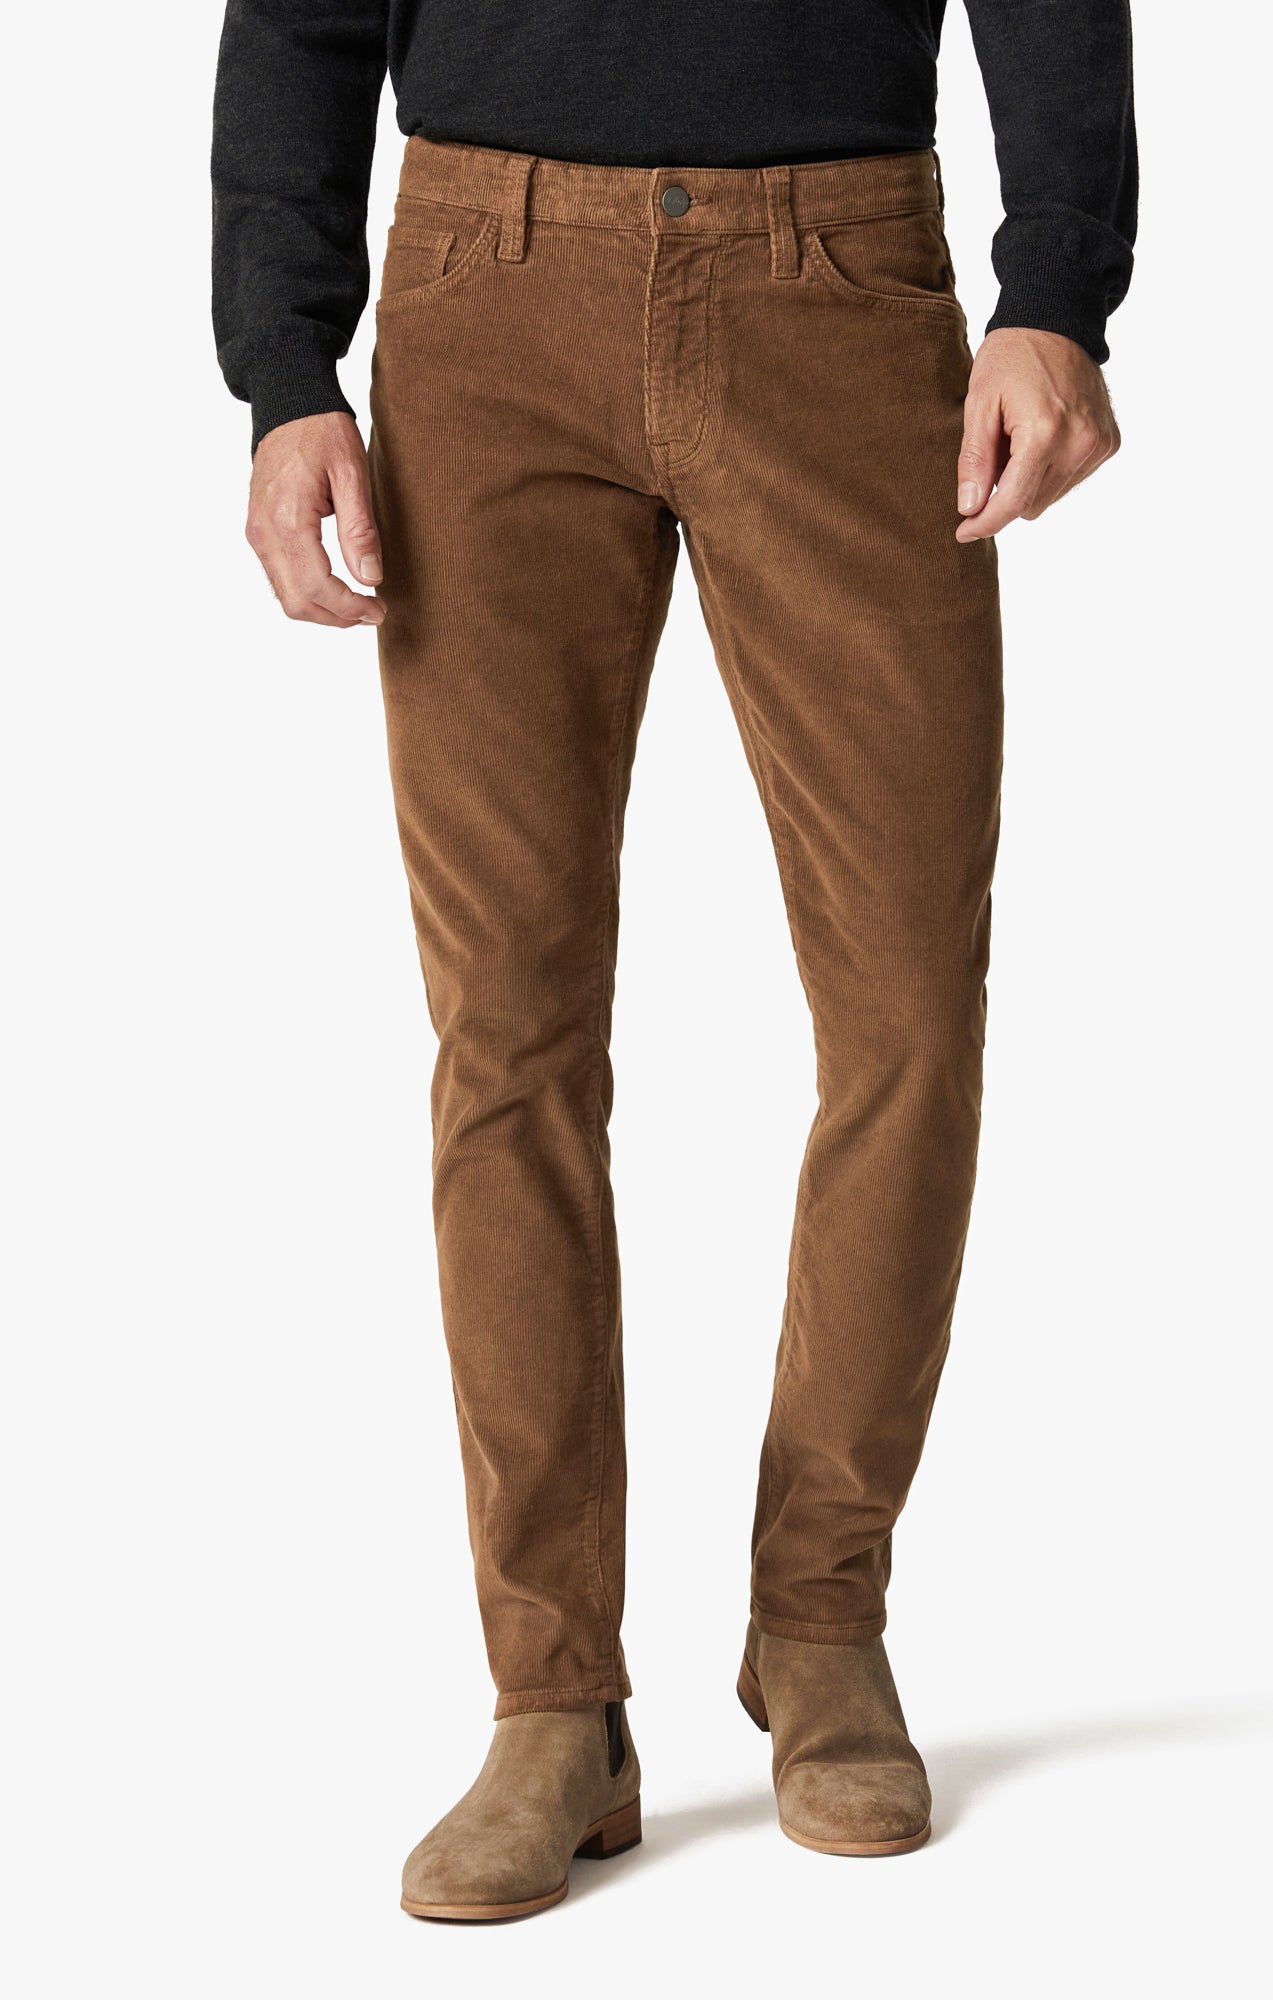 Cool Tapered Leg Pants In Cognac Cord Image 2